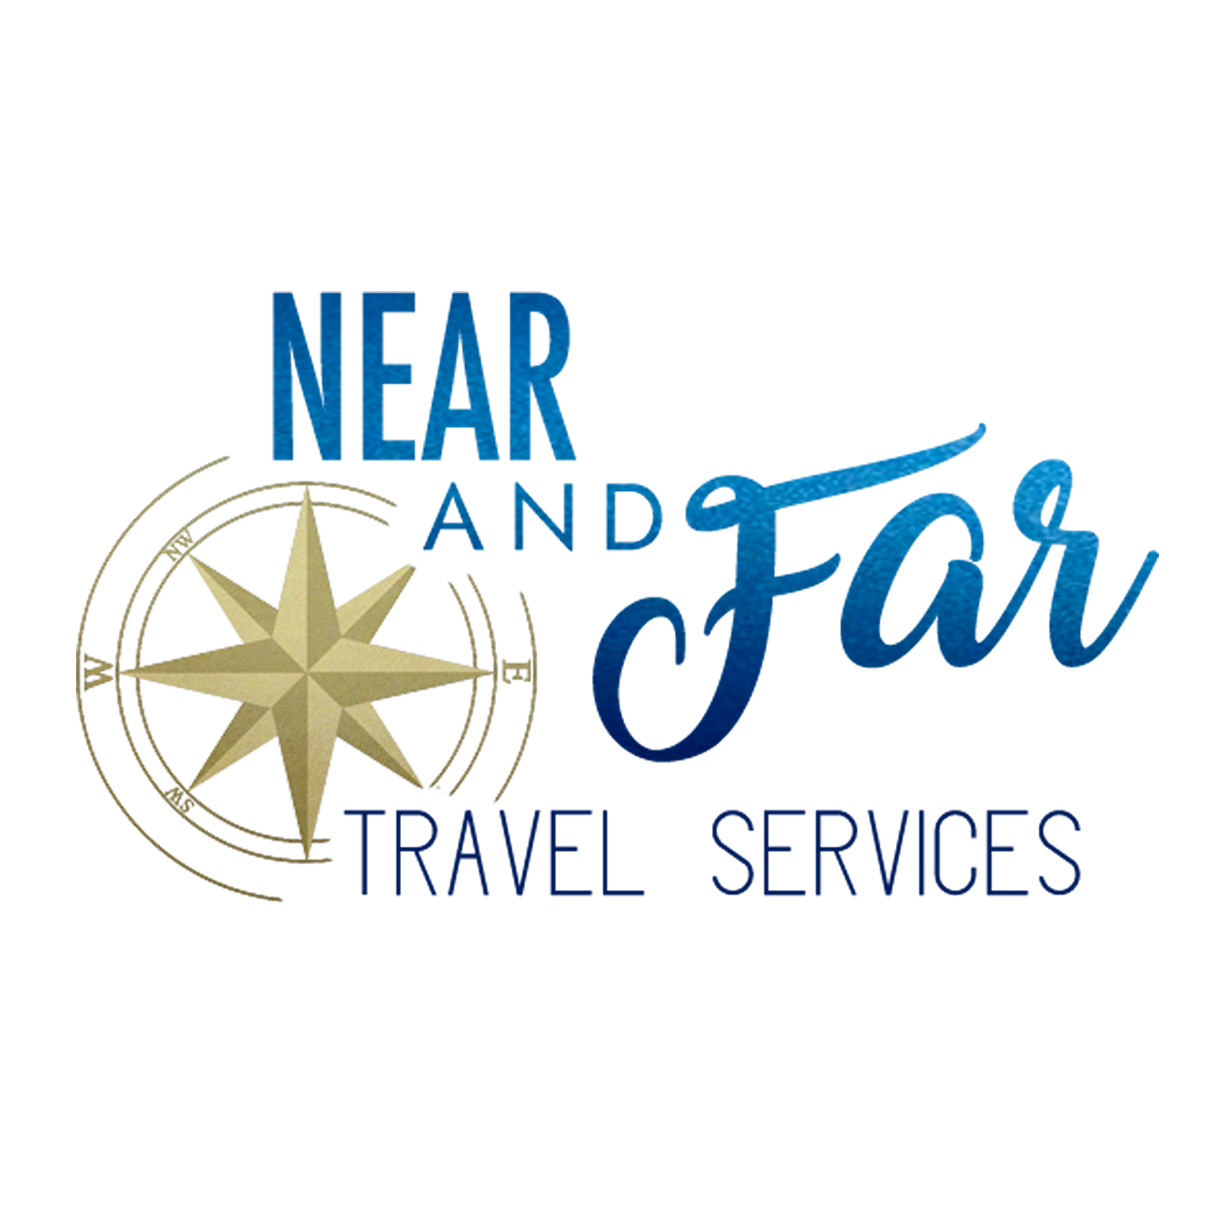 Near and Far Travel Services